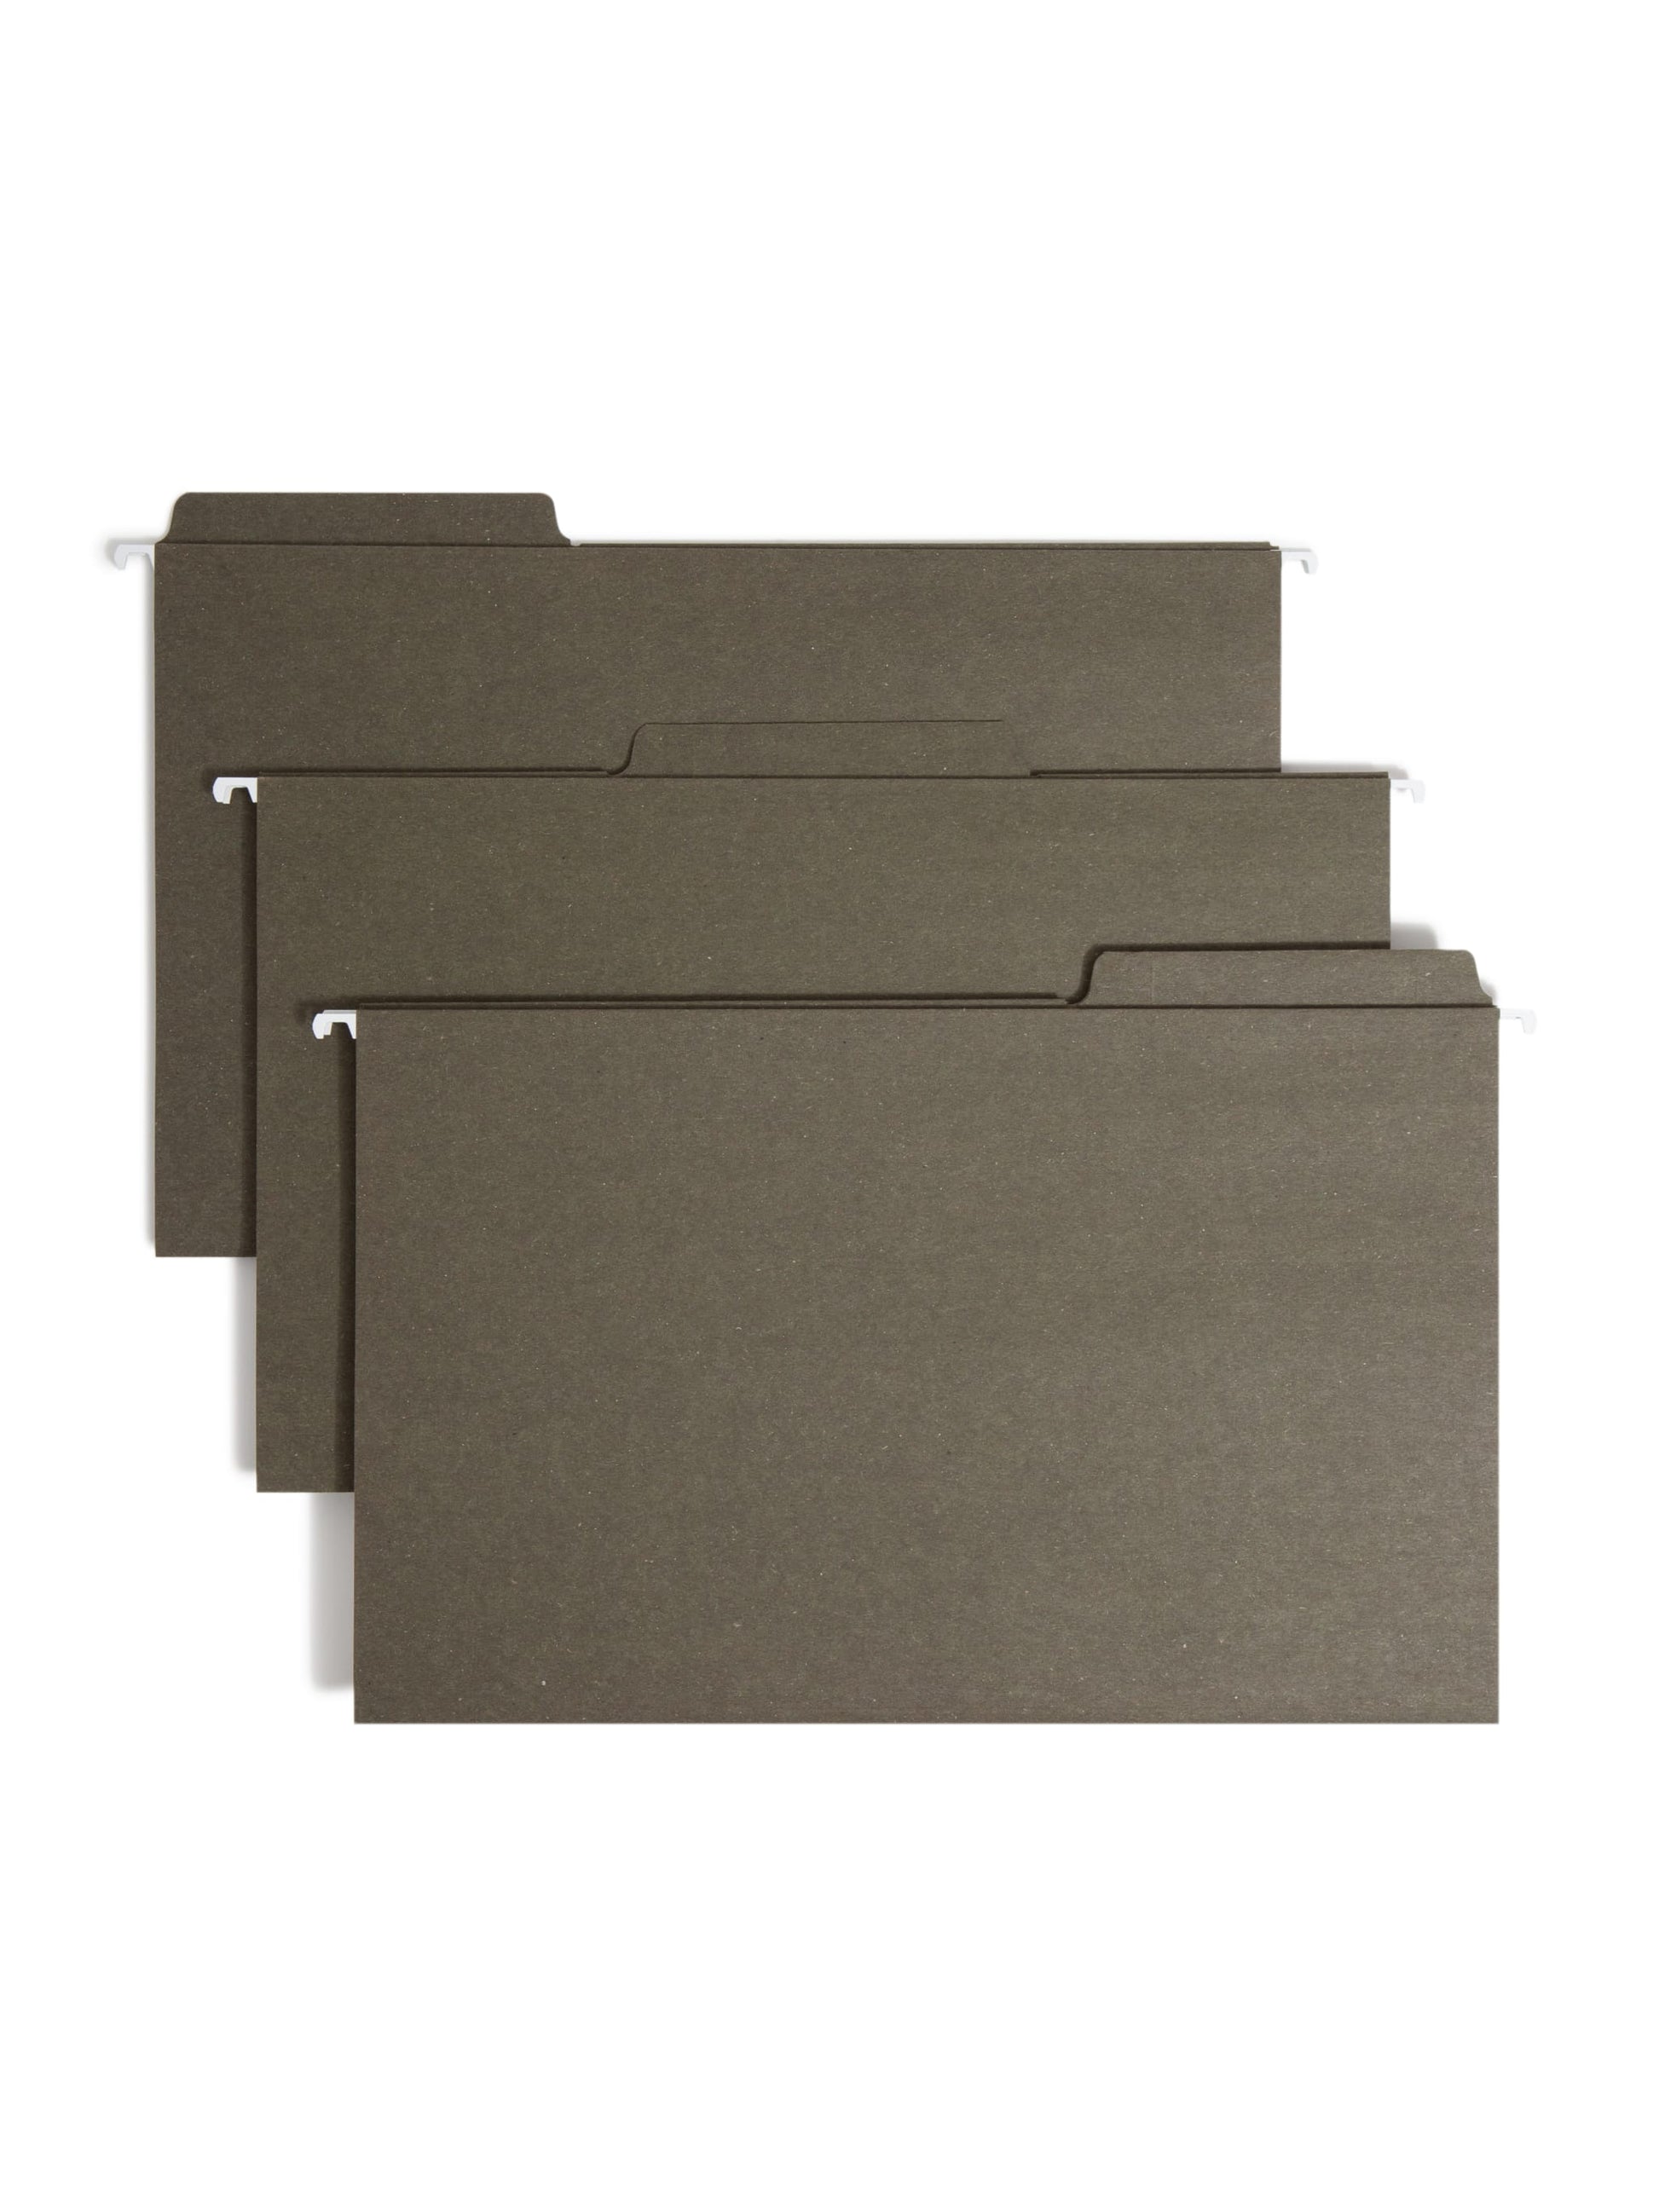 100% Recycled FasTab® Hanging File Folders, Standard Green Color, Legal Size, Set of 20, 086486641371